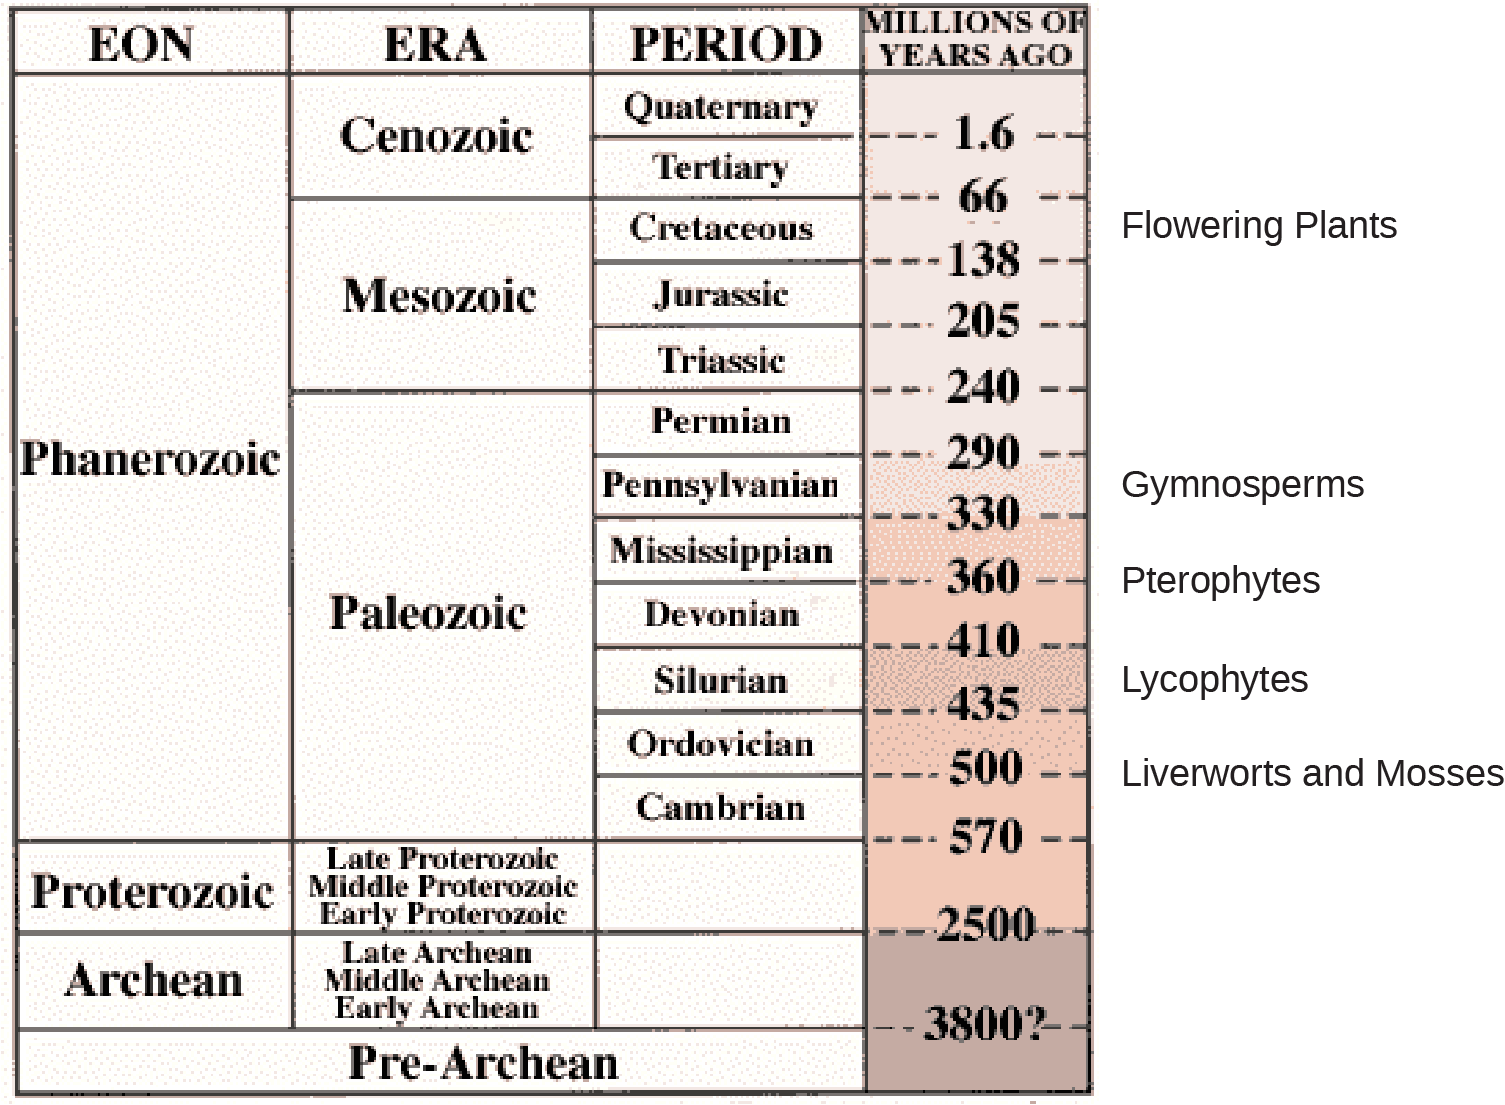 Part A is a table showing a timeline of geological eras. The columns of the table read, from left to right, Eon, era, period, millions of years ago. It shows that during the Phanerozoic eon, three eras occured; the Cenozoic, mesozoic, and the paleozoic. The cenozoic era contained the quaternary period, which occured 1.6 million years ago, and the tertiary period, which occured 66 million years ago. The mesozoic era contained the cretaceous period, occuring between 66 and 138 million years ago. Flowering plants evolved during this period. The Jurrasic period occured between 138 and 205 million years ago, and the triassic period occured between 205 and 240 million years ago. The Paleozoic era contained many periods. The permian period occured between 240 and 290 years ago. The Pennsylvanian period occured 290 to 330 million years ago, and gymnosperms evolved then. The Mississippian period occured 330 to 360 million years ago. Pterophytes evolved around 360 million years ago. The Devonian period occured 360 to 410 million years ago. The silurian period occured 410 to 435 million years ago, in which lycophytes evolved. The ordovician period occured 435 to 500 million years ago; in which liverworts and mosses evolved. The cambrian period occured 500 to 570 million years ago. During the Proterozoic eon, there were three eras, the late, middle, and early proterozoic eras. These occured between 570 and 2500 million years ago. In the archean eon, three eras occured; late, middle, and early archean eras. These occured from 2500 to 3800 million years ago. Pre archean is shown as a single eon, era, and period, occuring more than 3800 million years ago.